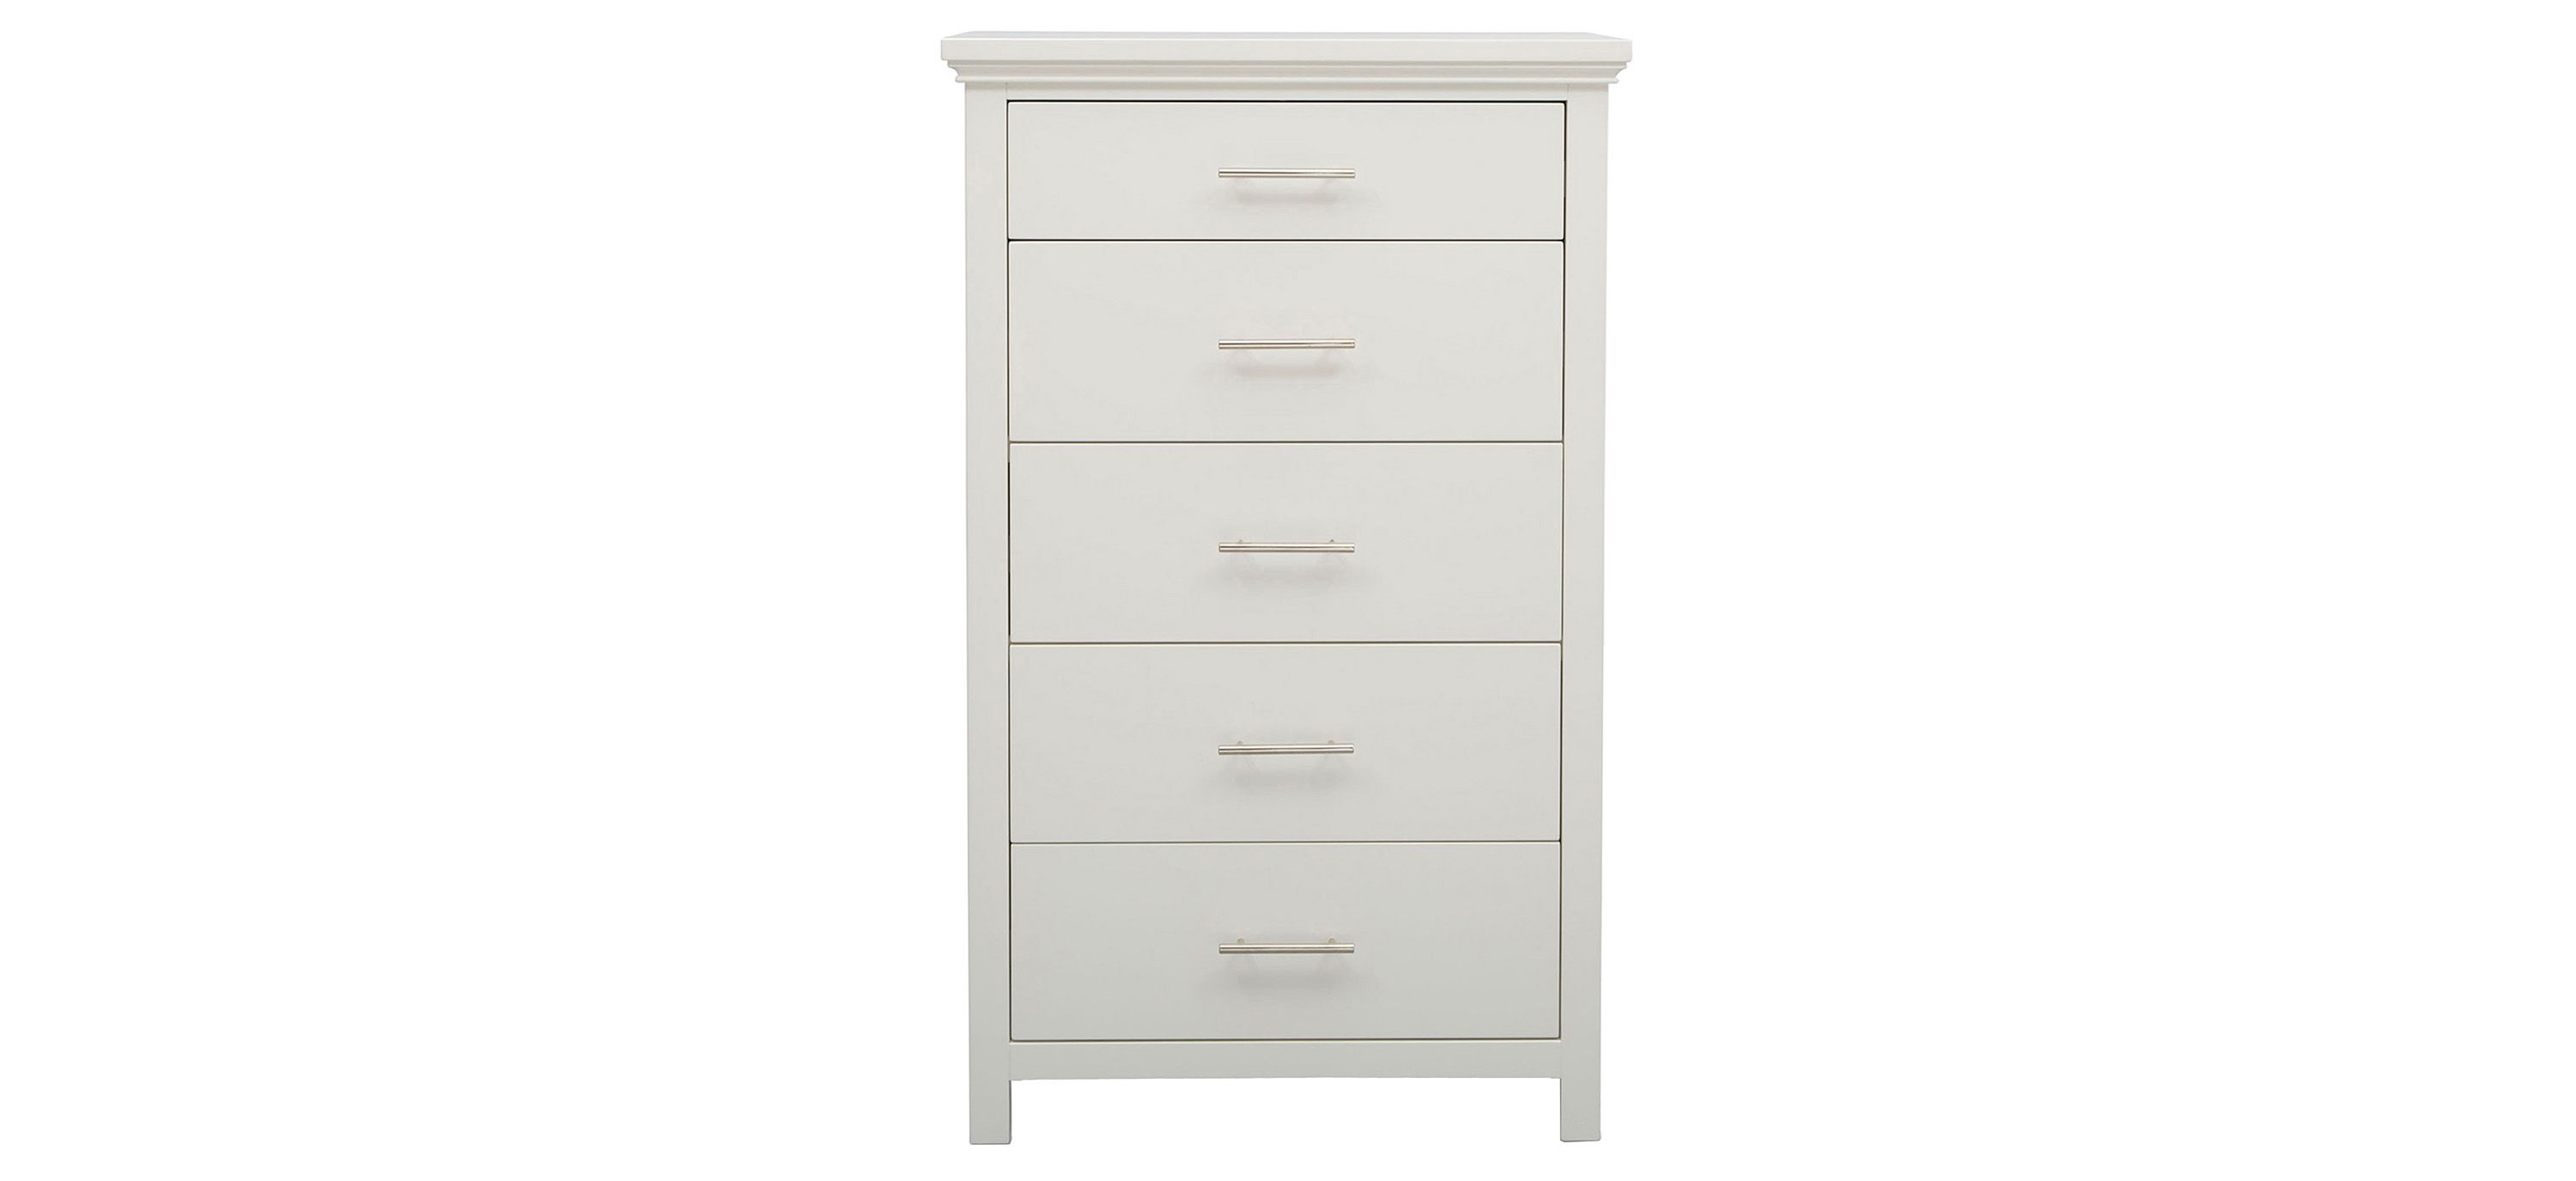 Avery Bedroom Chest by Delta Children